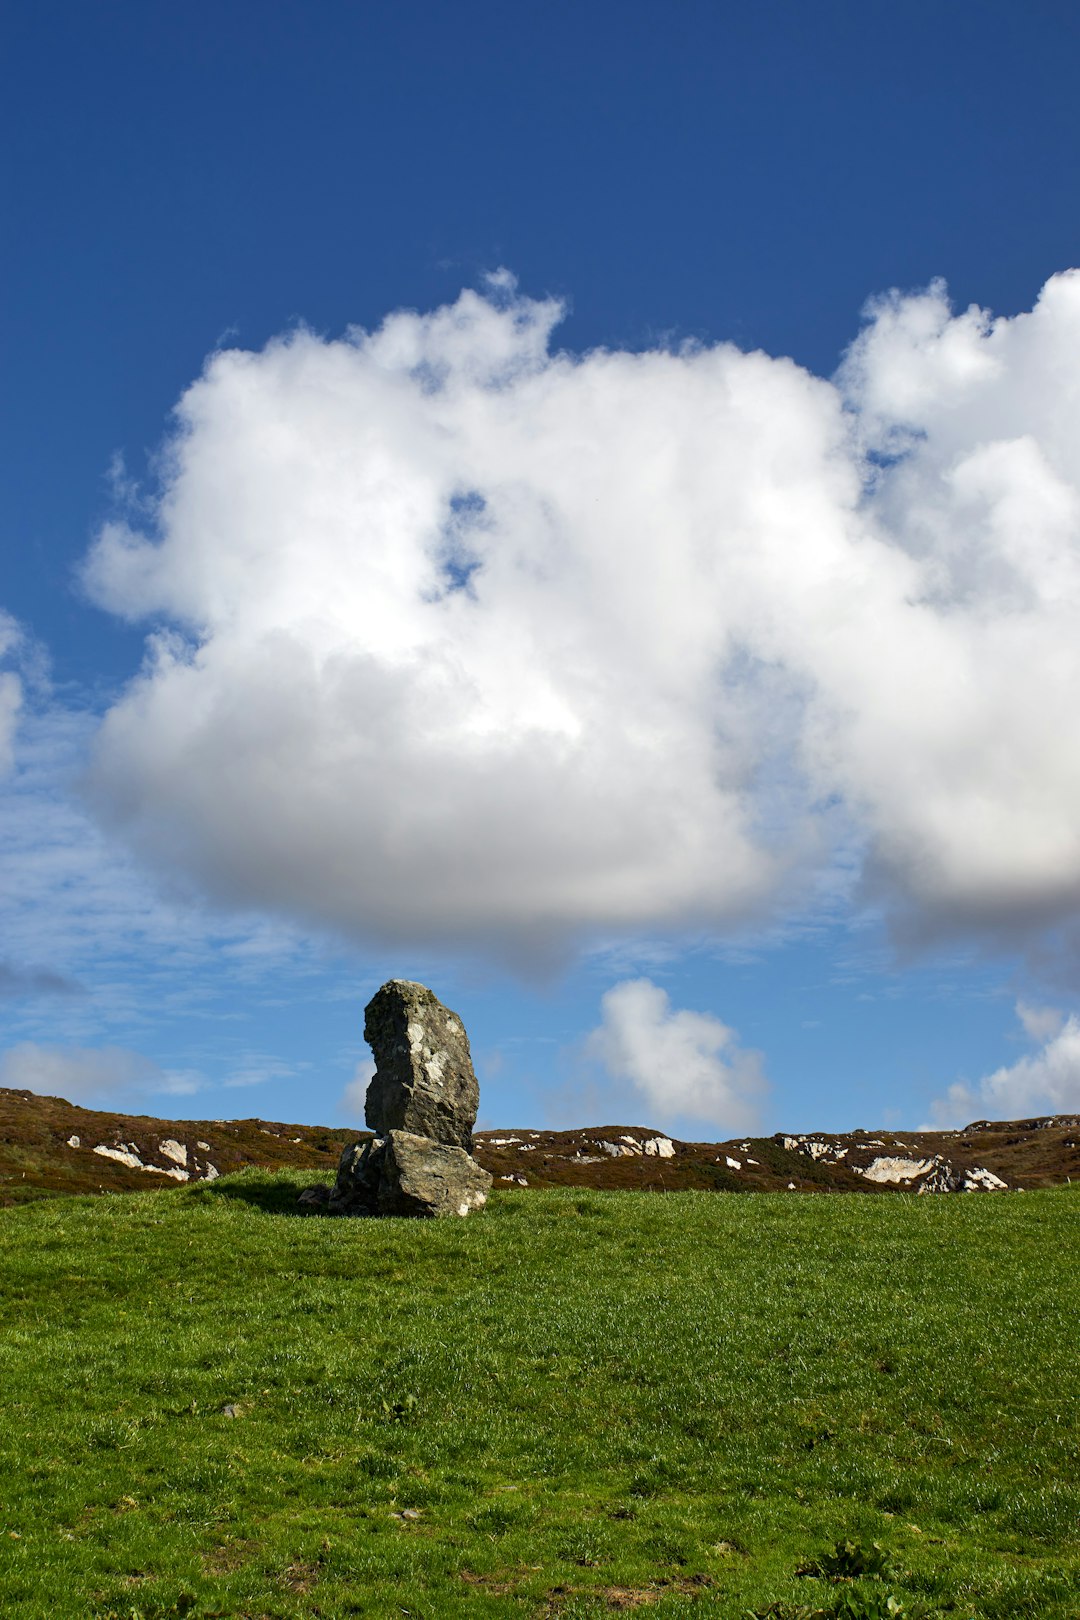 gray rock formation under white clouds and blue sky during daytime